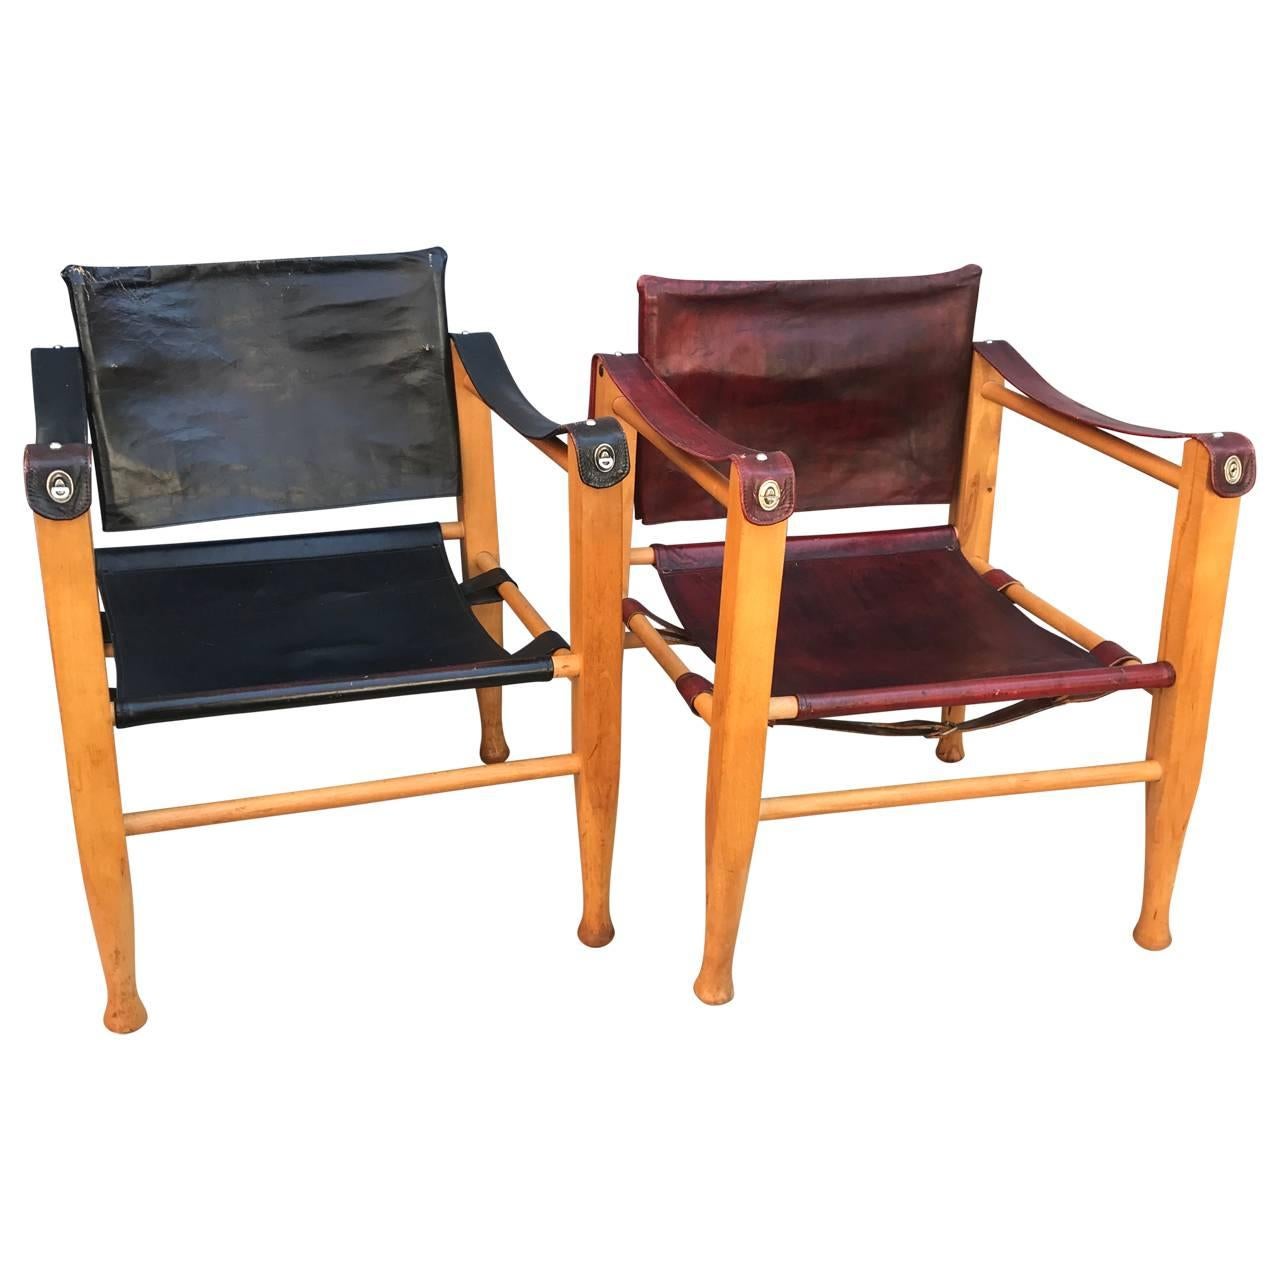 Two vintage Danish Safari chairs, one in thin black leather and one in thin red leather. Both seat has original backing to the leather for strength.

$125 flat rate front door delivery includes Washington DC metro, Baltimore and Philadelphia